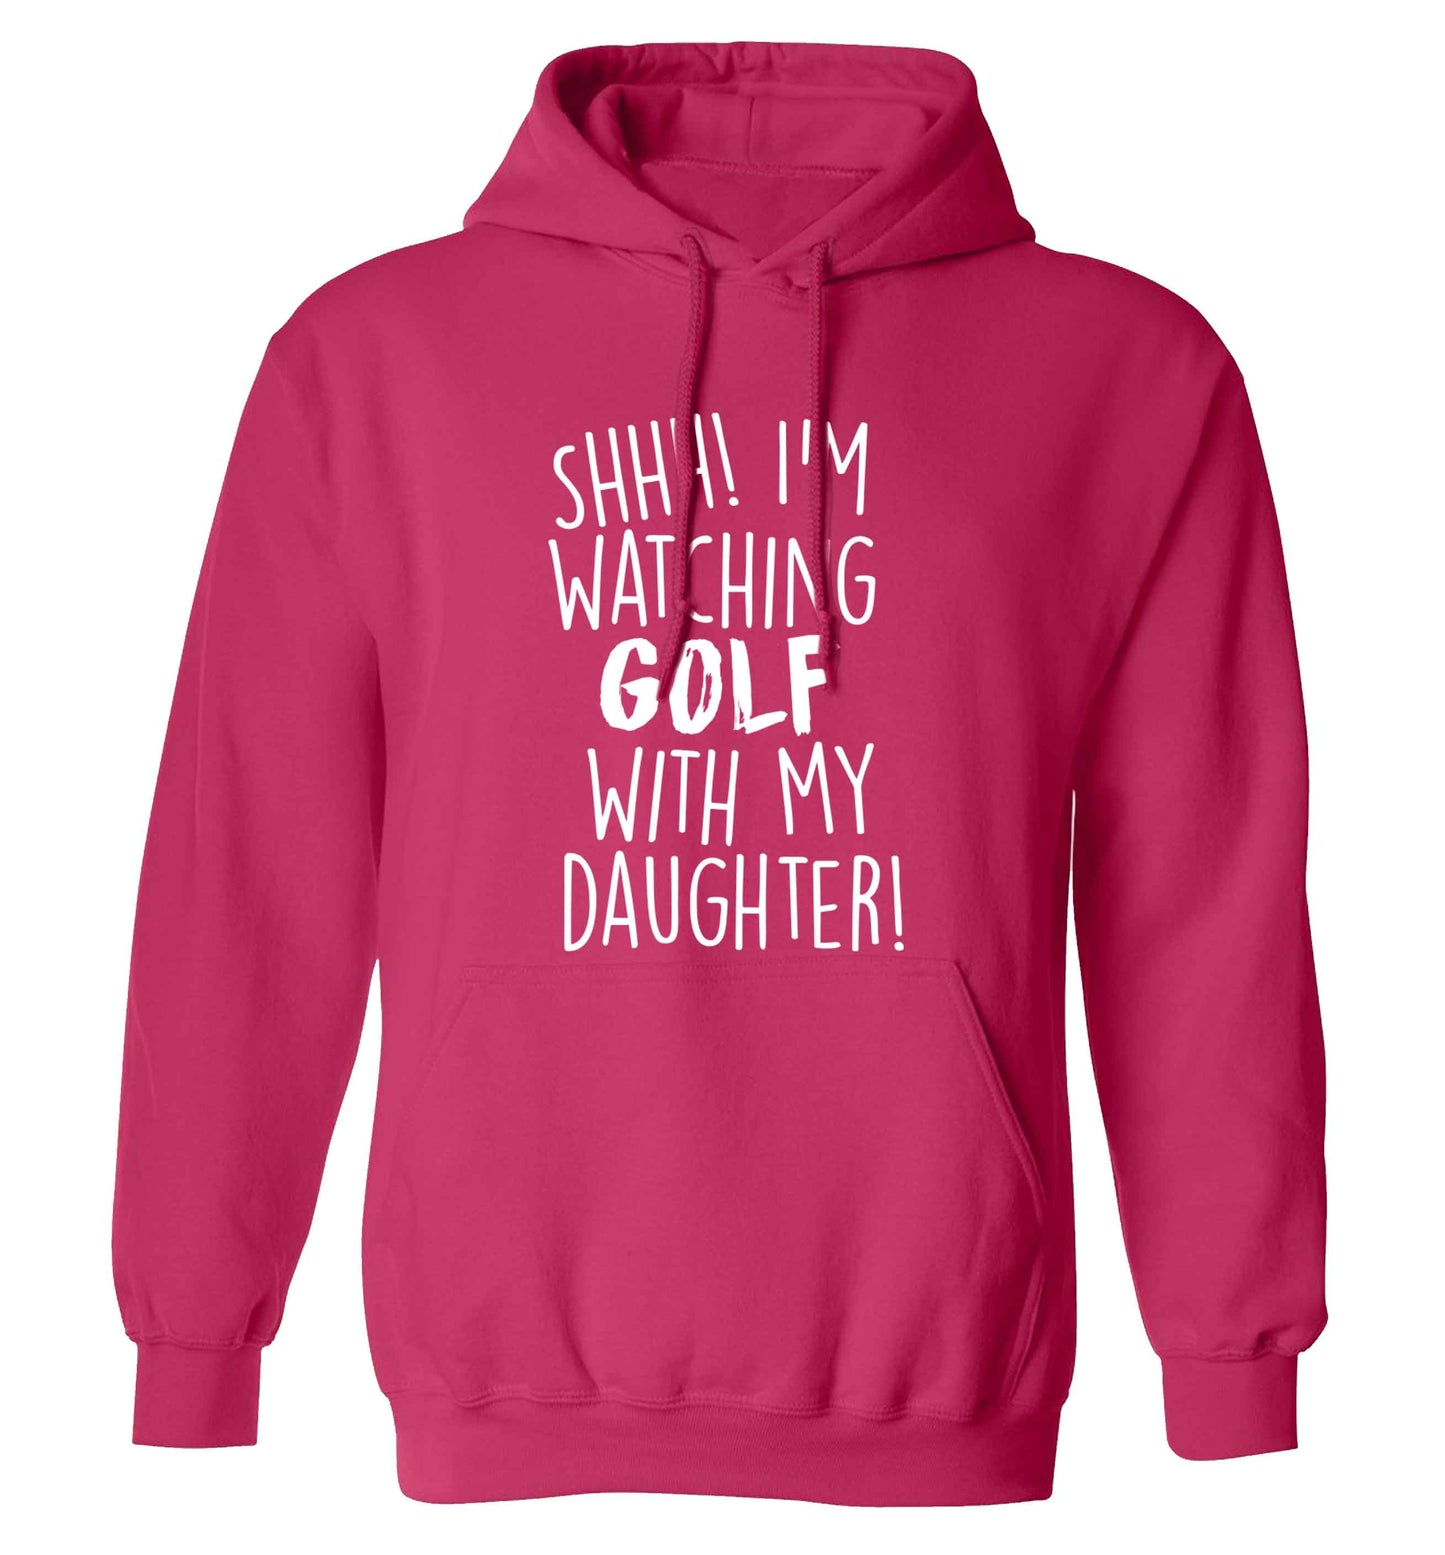 Shh I'm watching golf with my daughter adults unisex pink hoodie 2XL